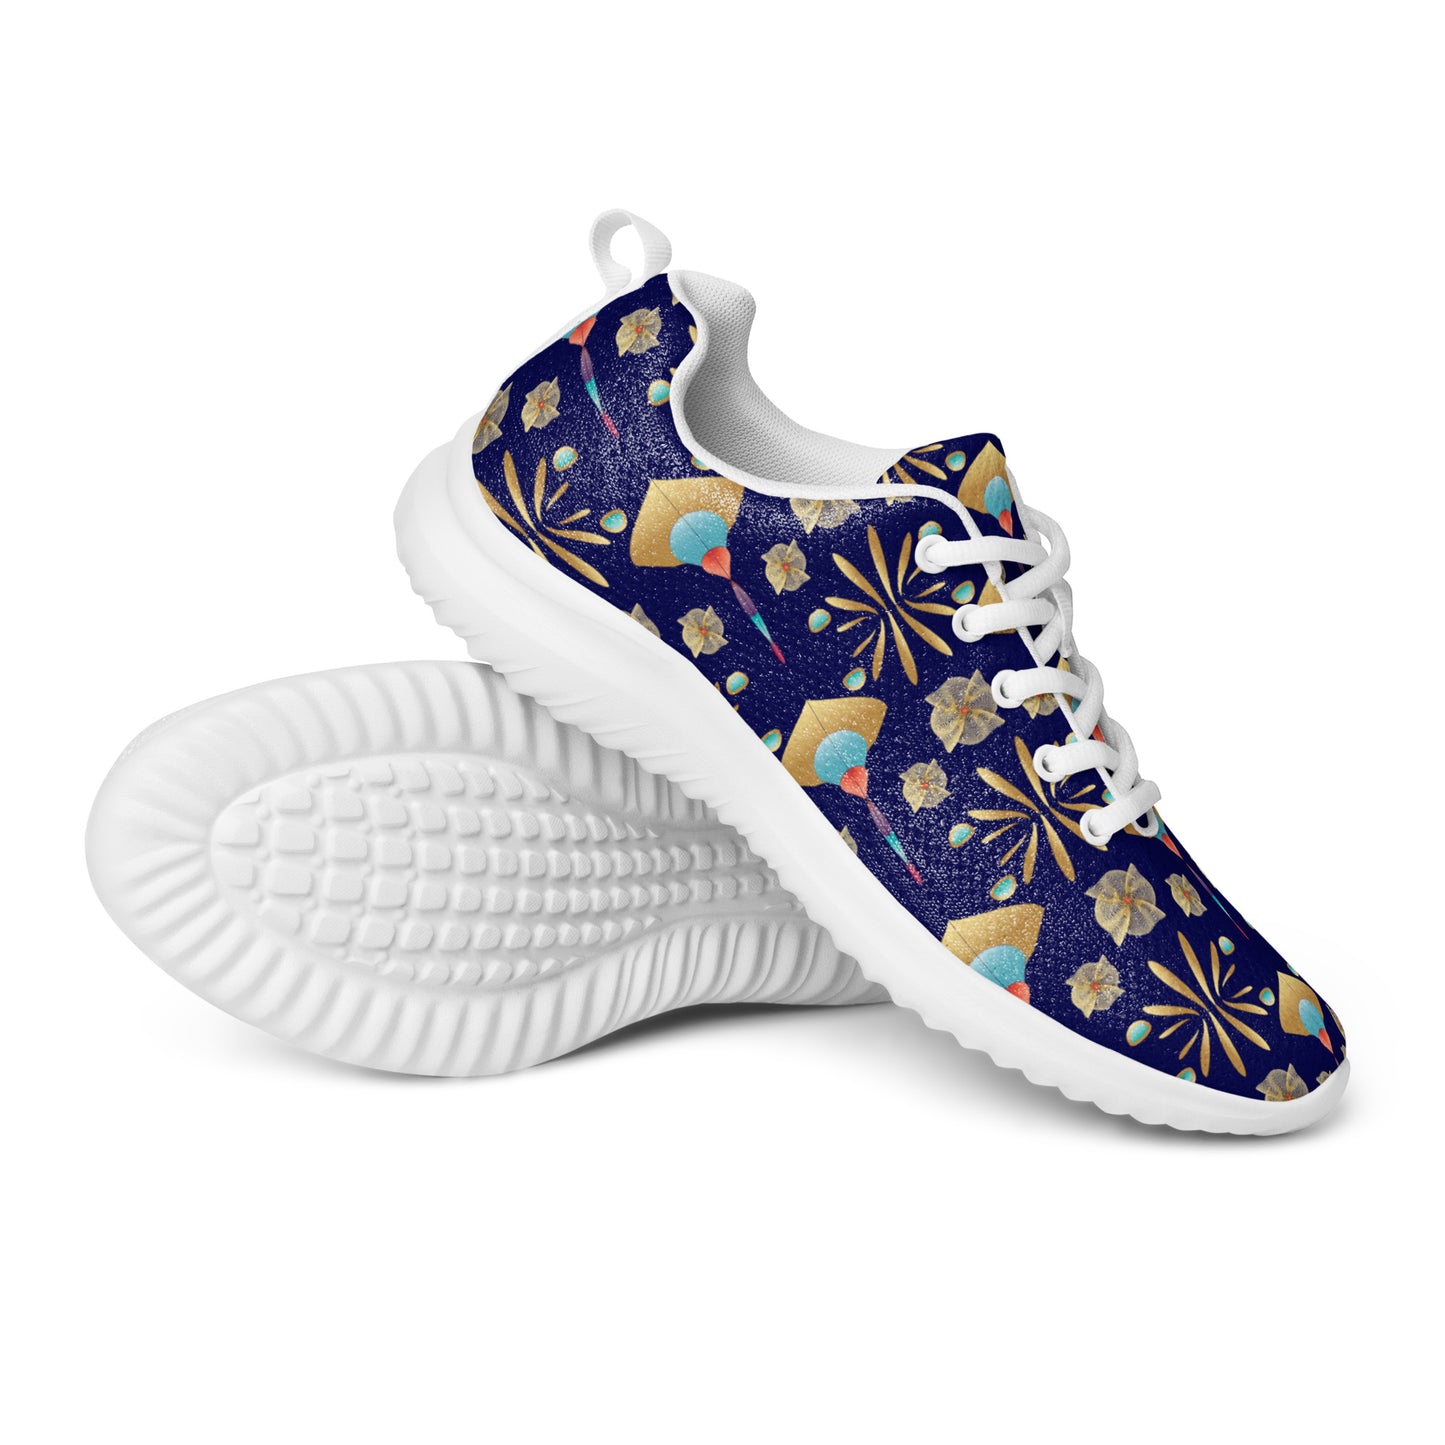 Women’s athletic shoes Kukloso Abstractical No 55 Gold Shapes on Navy - Free Shipping